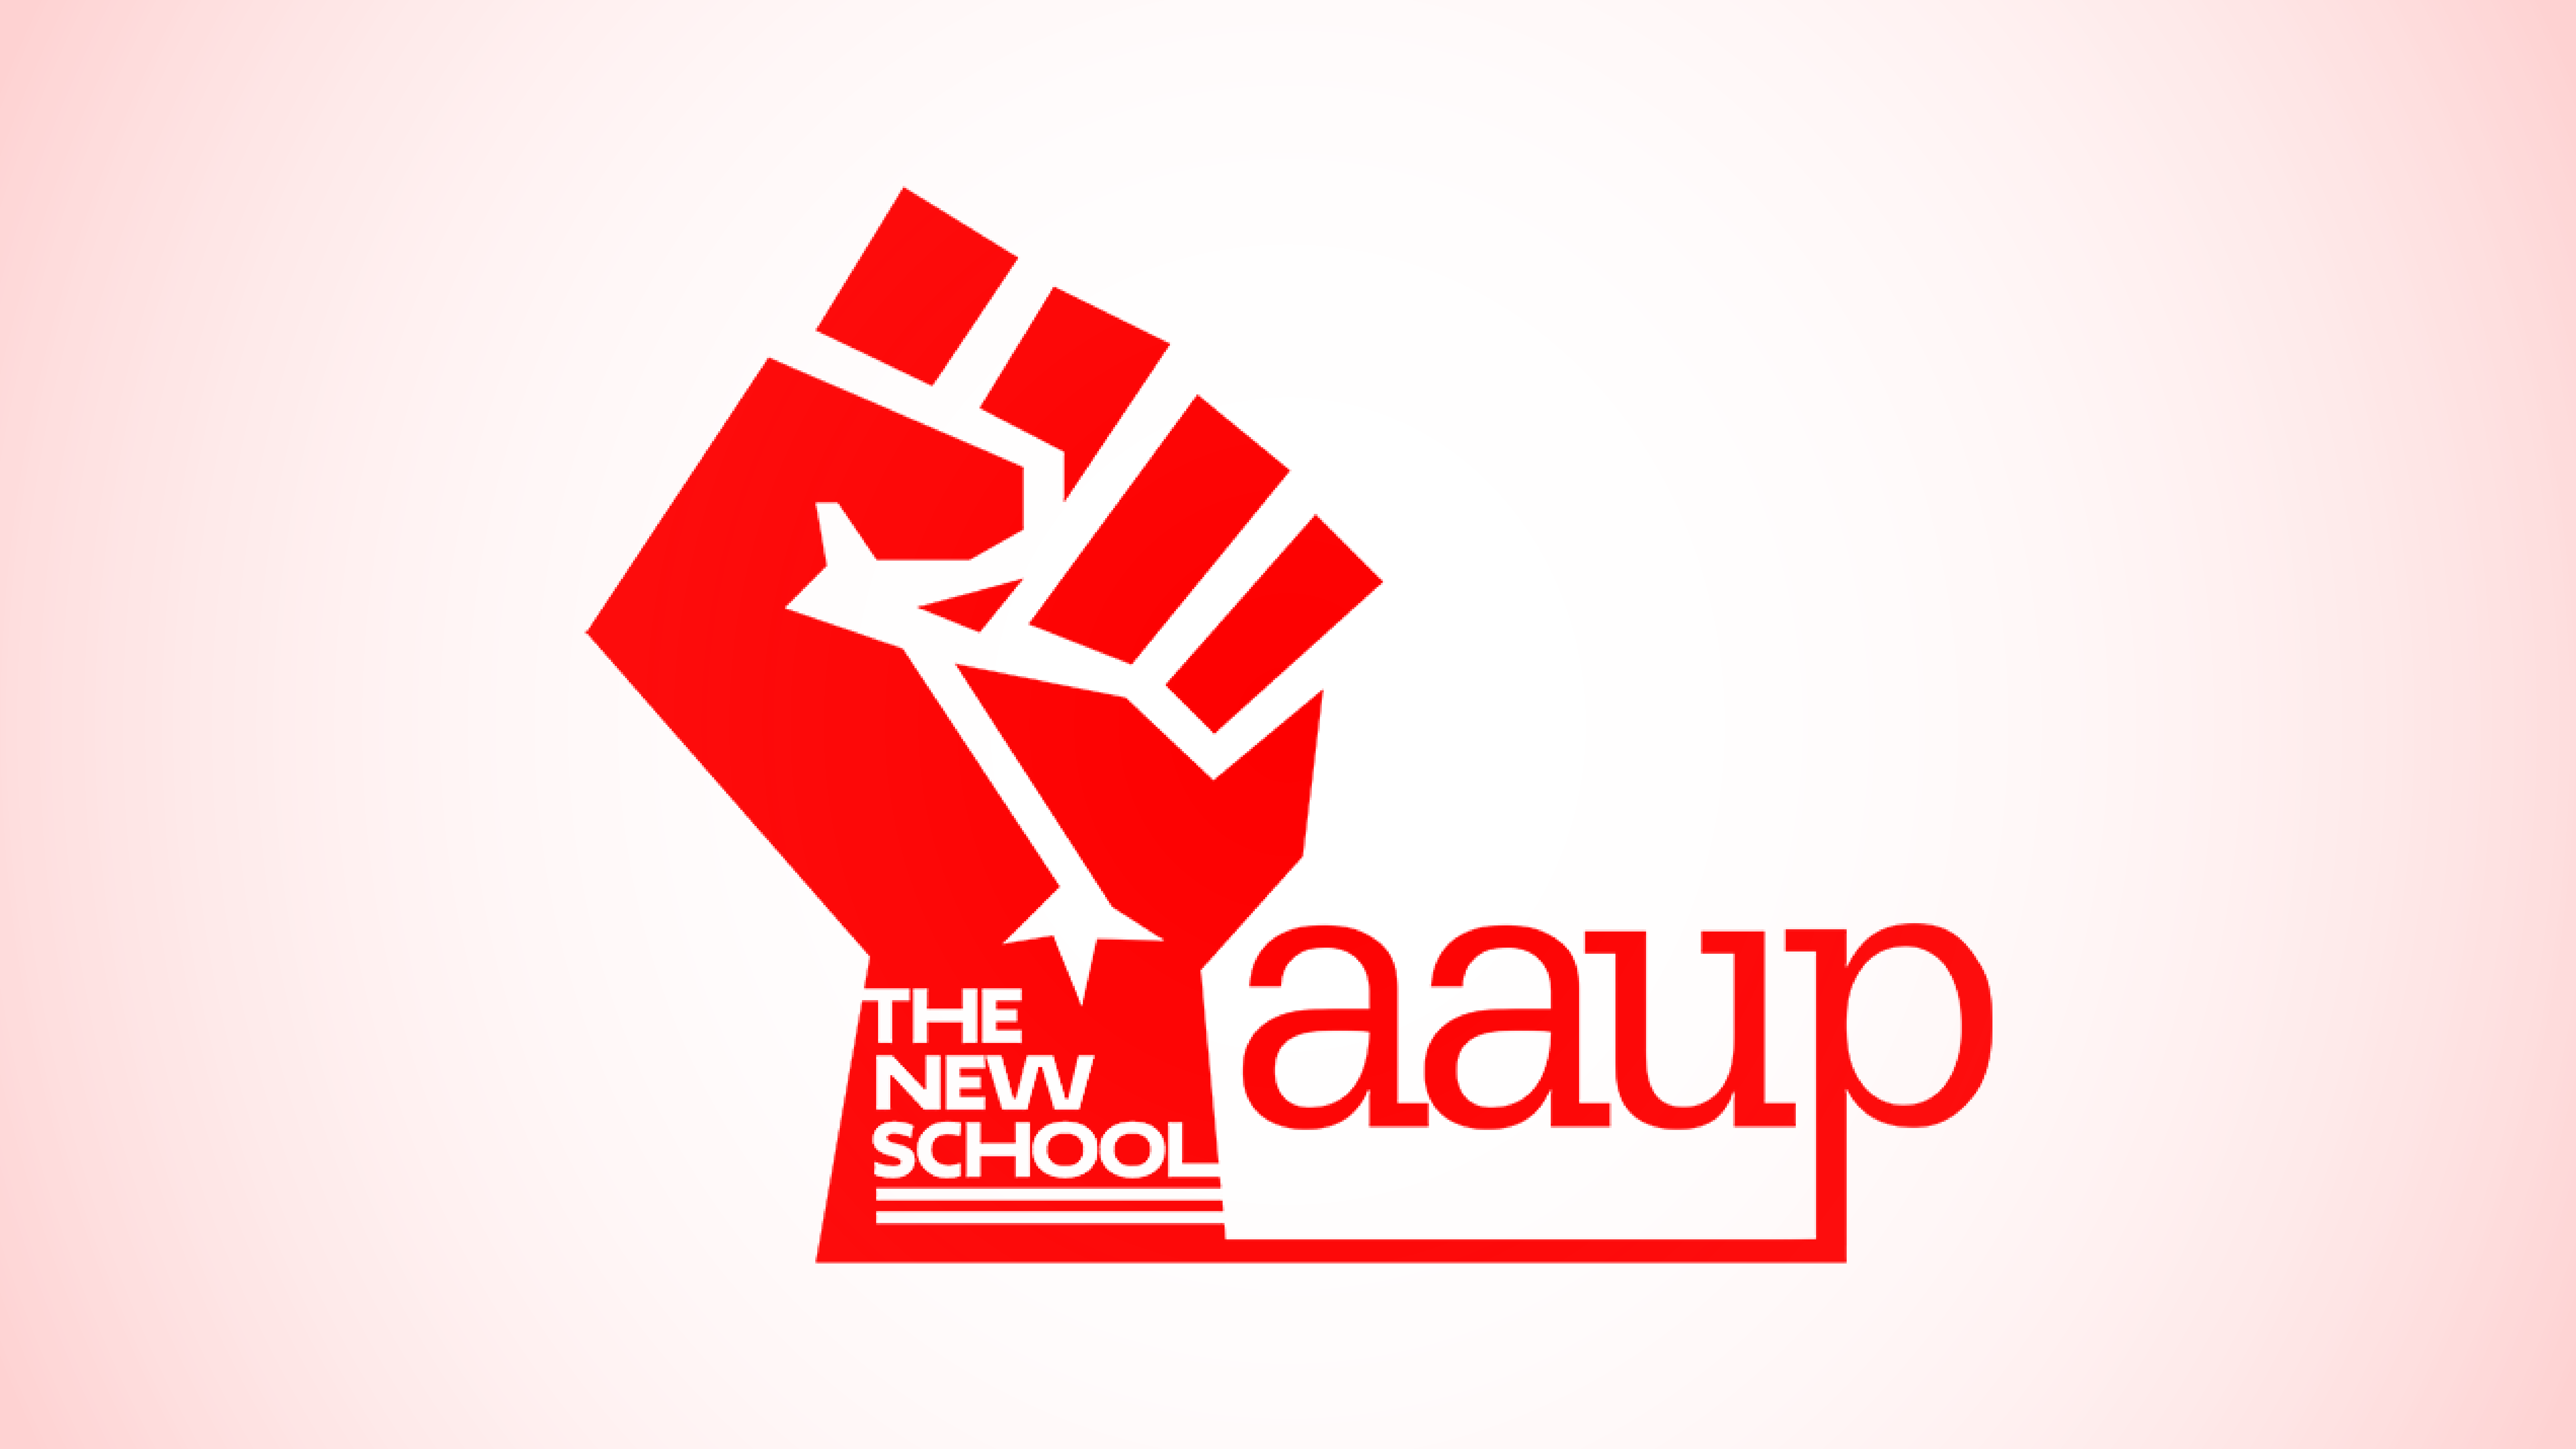 white and pink toned background with red fist logo saying "The New School aaup"